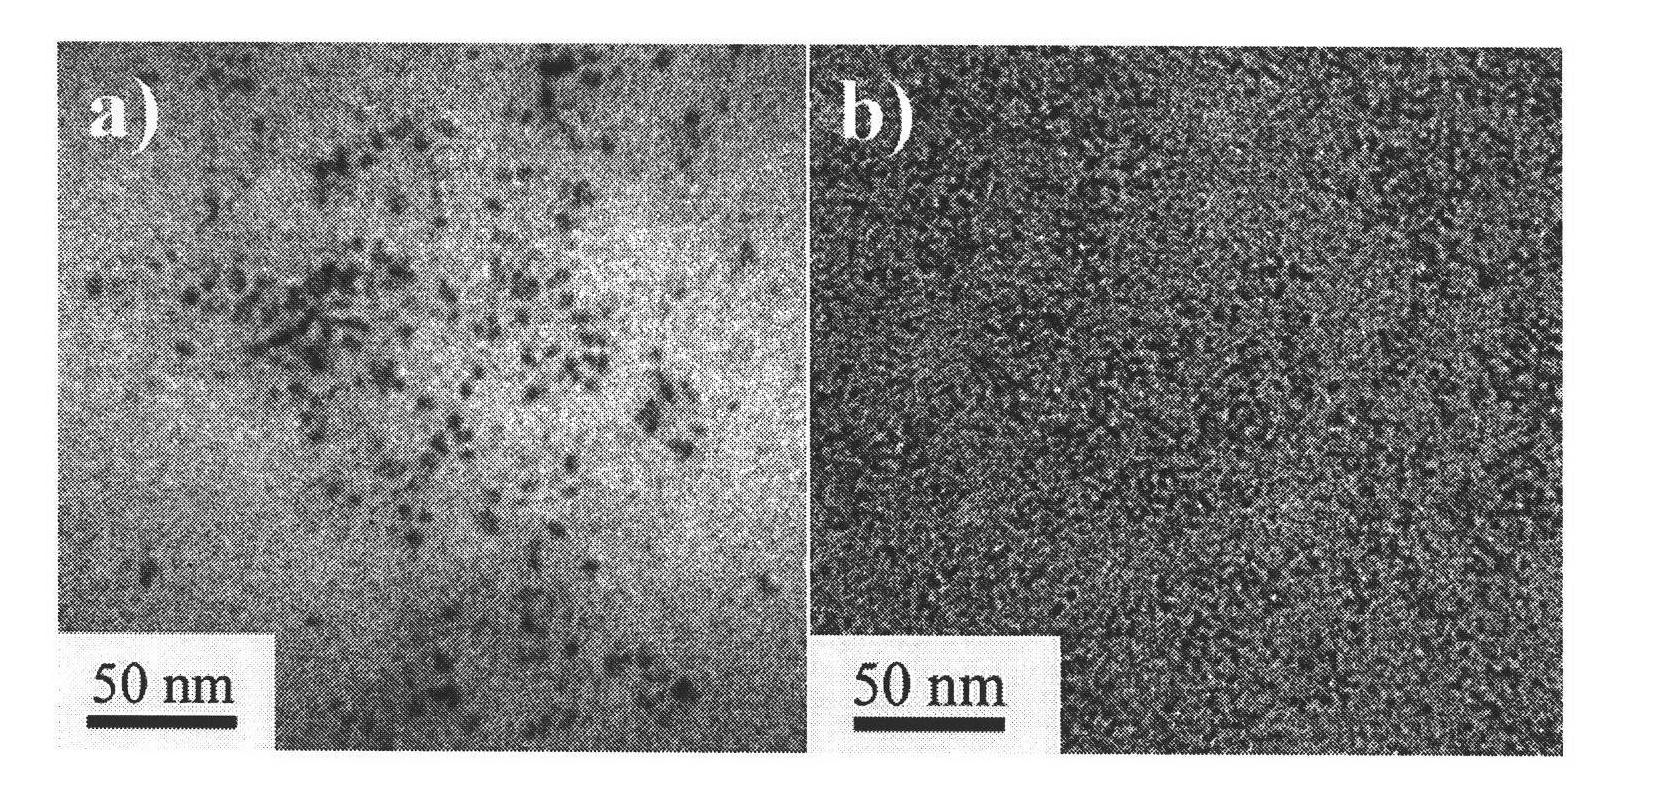 Pyrolytic synthesis method for water-soluble fluorescent carbon nano-particles